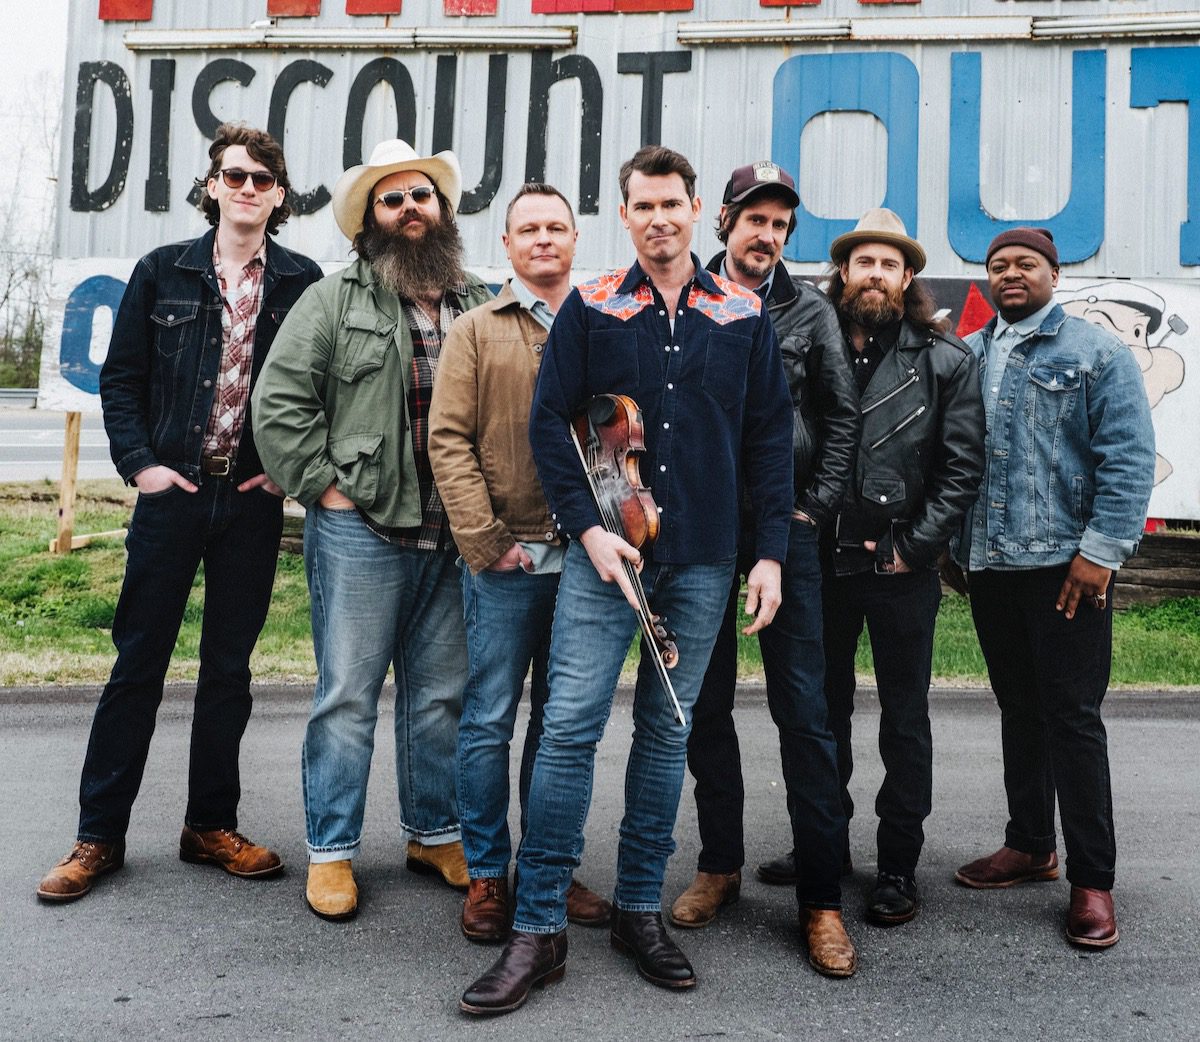 The seven current members of Old Crow Medicine Show